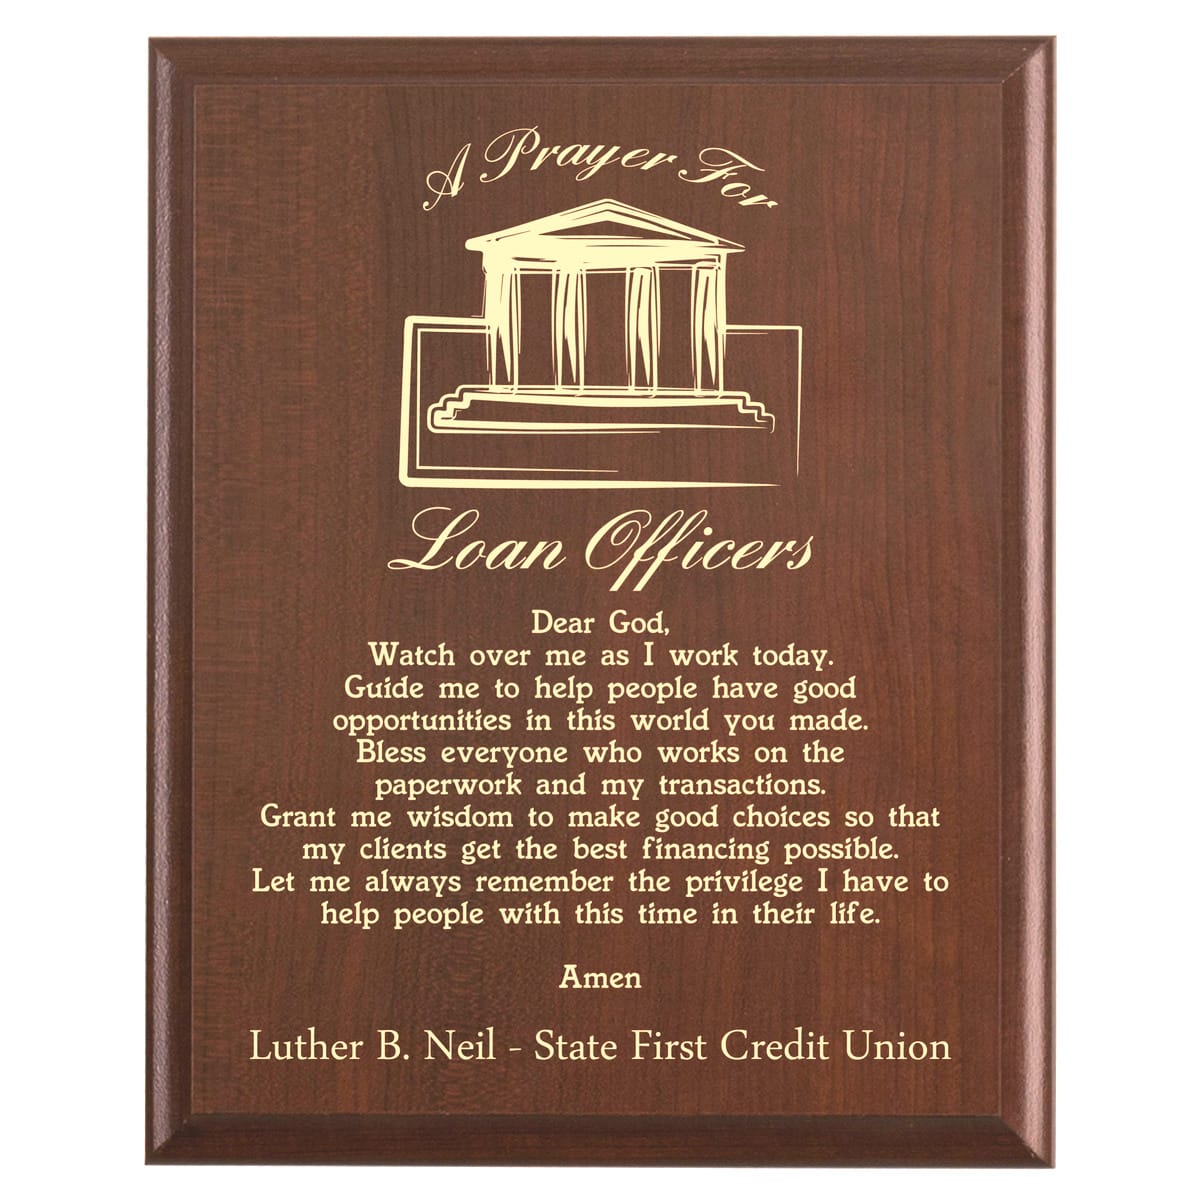 Plaque photo: Loan Officer Prayer Plaque design with free personalization. Wood style finish with customized text.